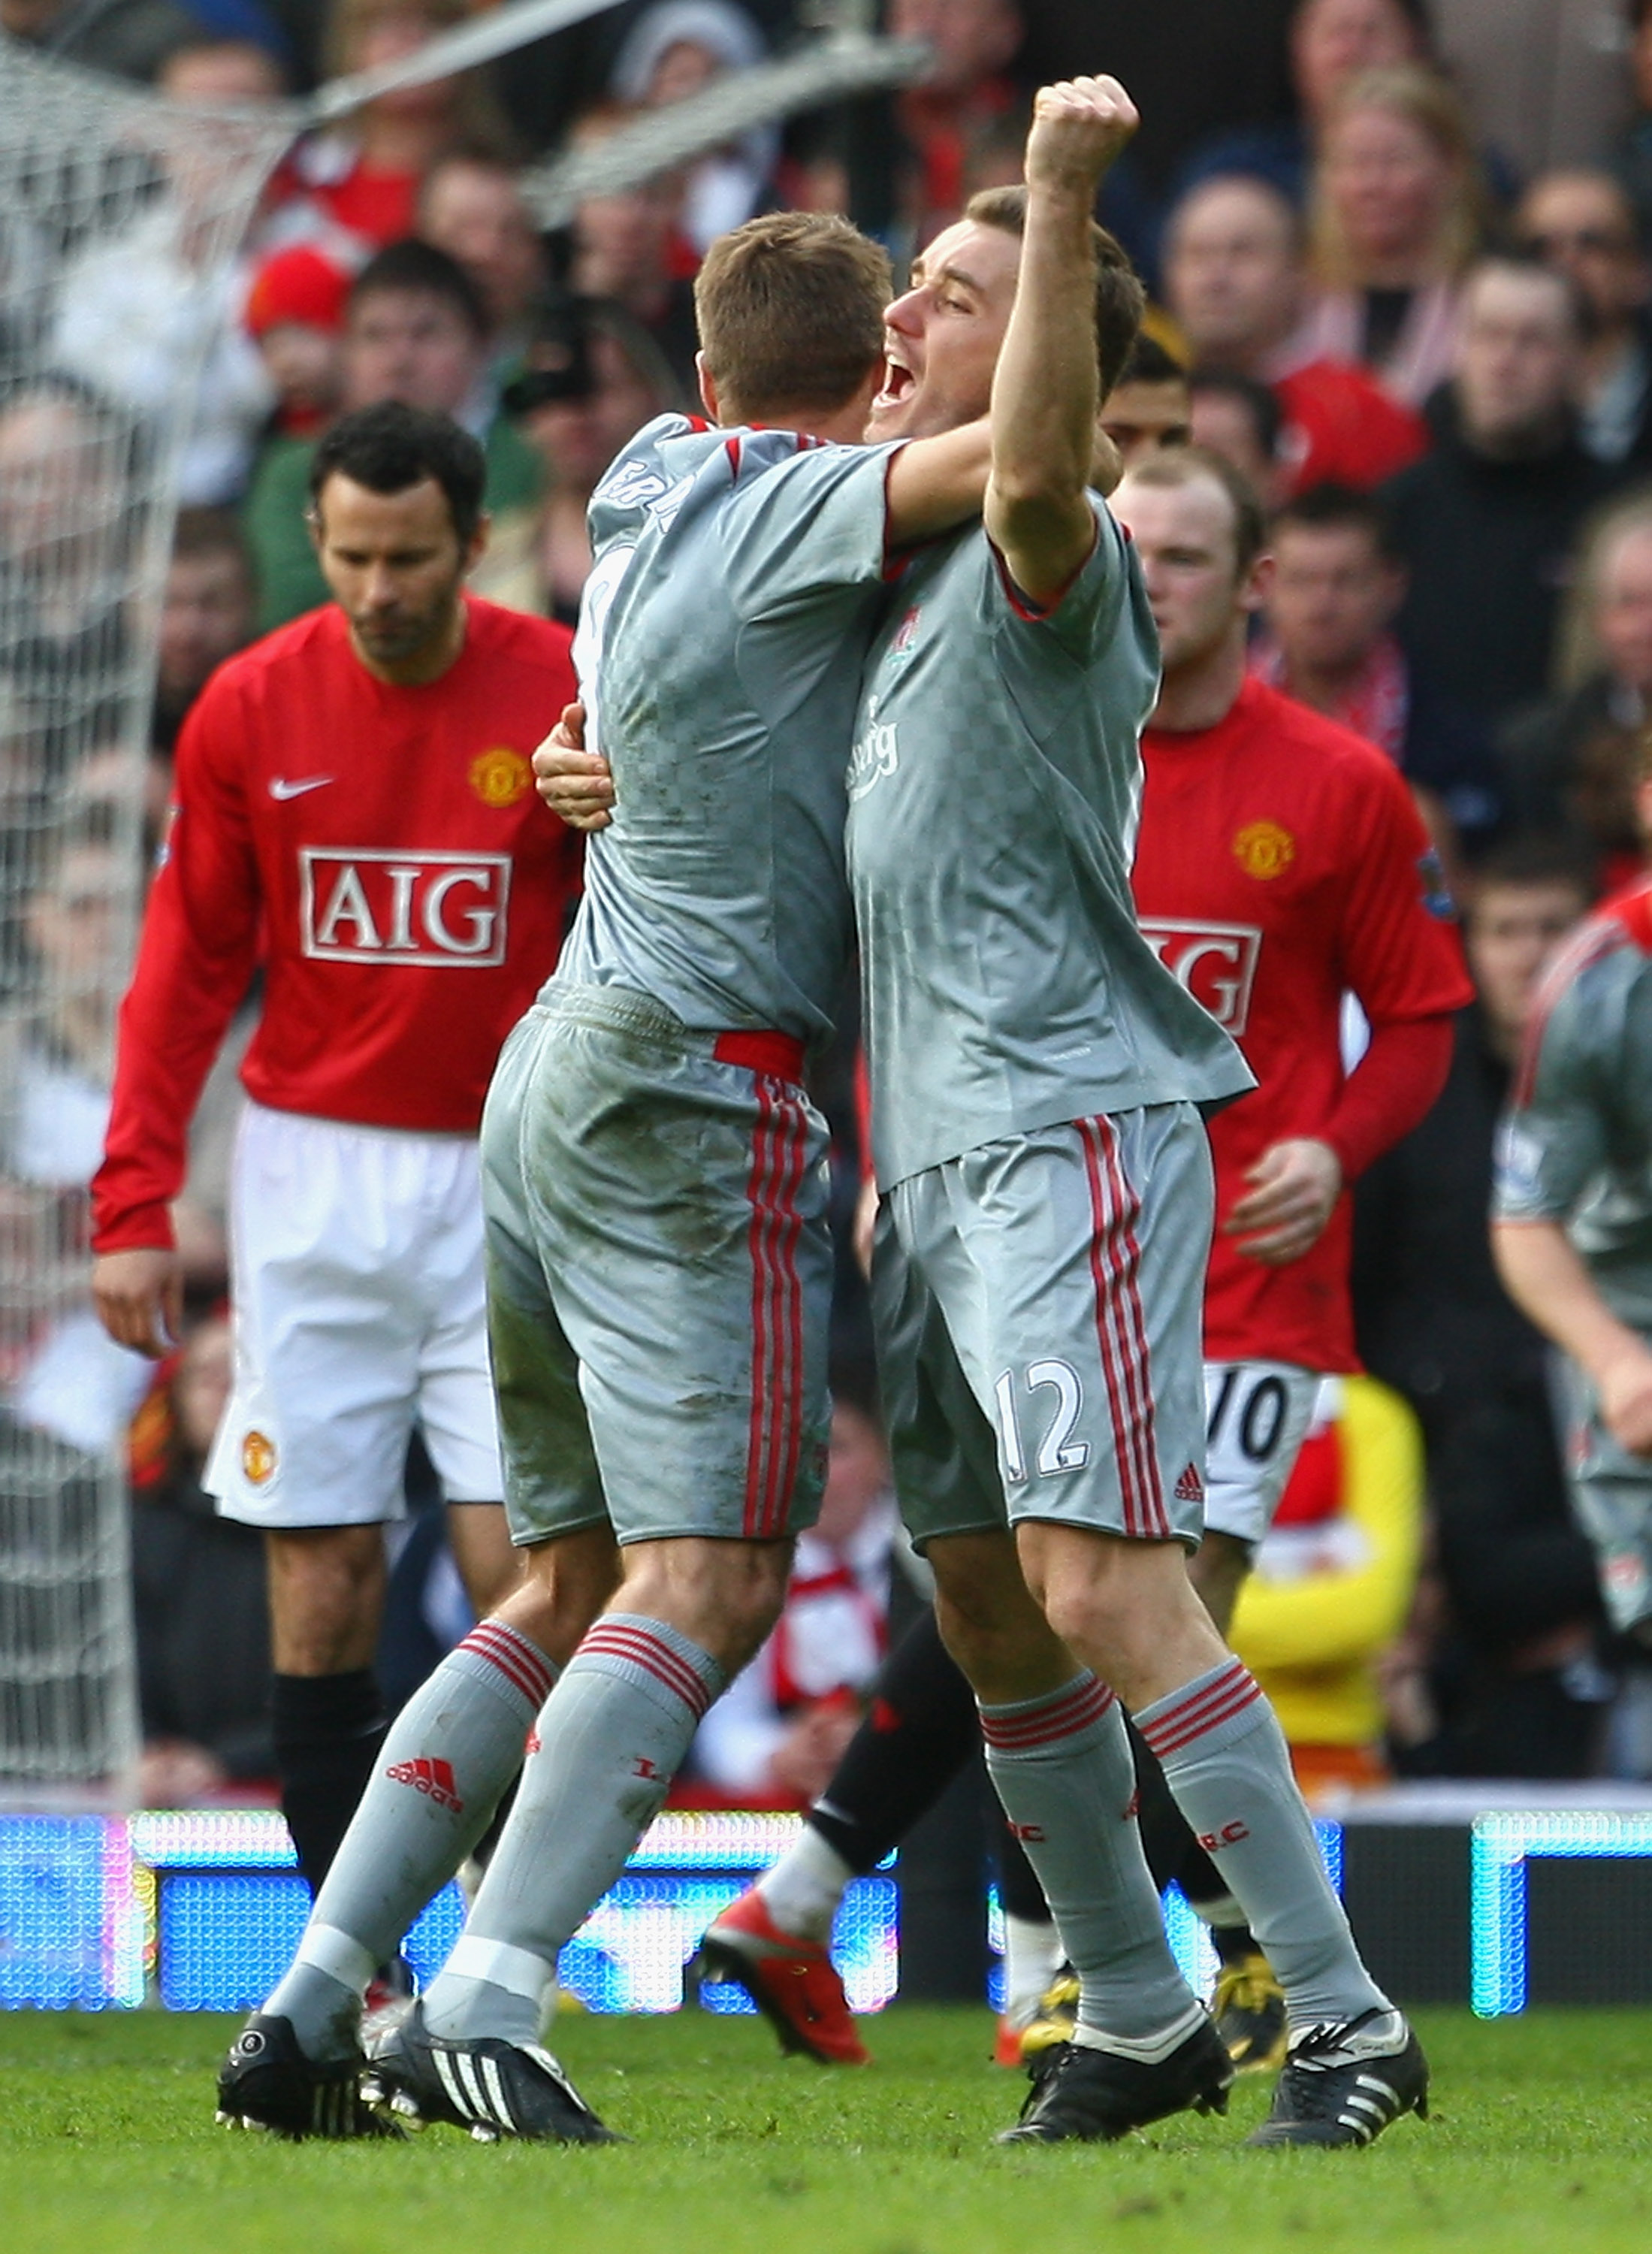 MANCHESTER, UNITED KINGDOM - MARCH 14:  Fabio Aurelio of Liverpool celebrates scoring his team's third goal with team mate Steven Gerrard during the Barclays Premier League match between Manchester United and Liverpool at Old Trafford on March 14, 2009 in